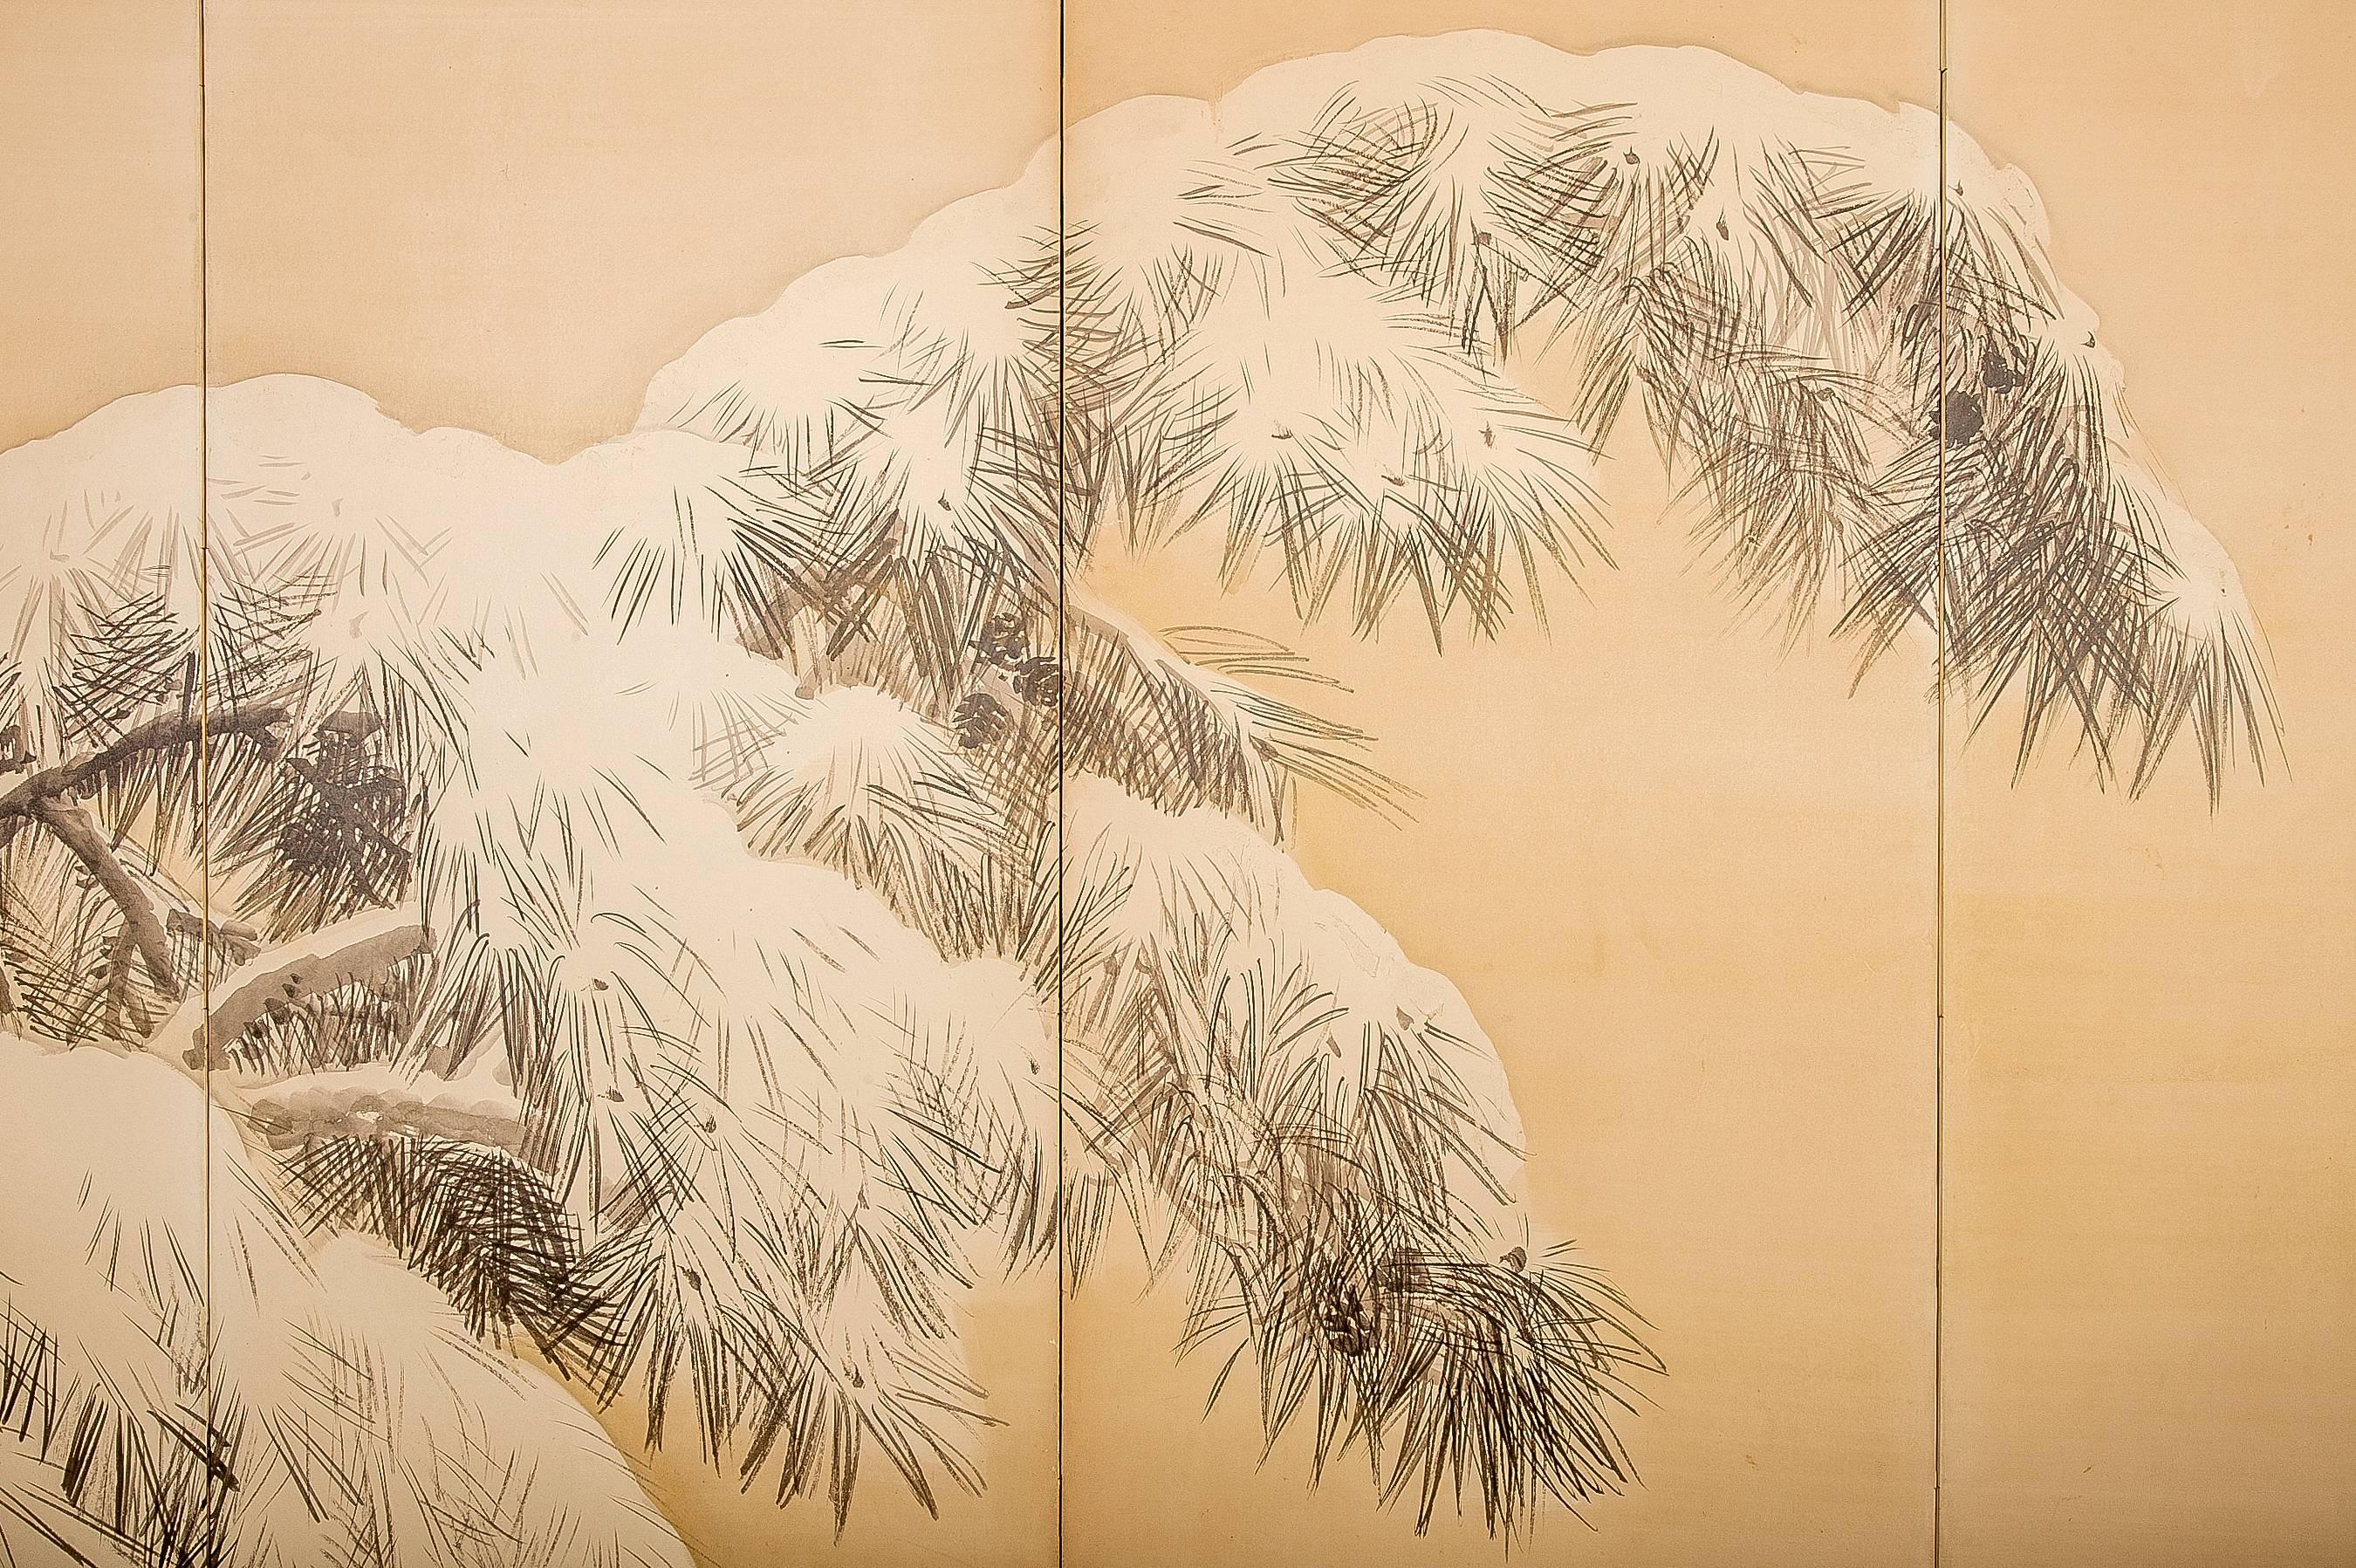 Japanese Six Panel Screen: Pine in Winter, Taisho period painting (1912 - 1926) in minimal color on paper, by Bunto Hayashi (1882-1966),  signed and sealed.  Hayashi was born in Kyoto, and studied under Maekawa Bunrei and Yamamoto Shunkyo. He